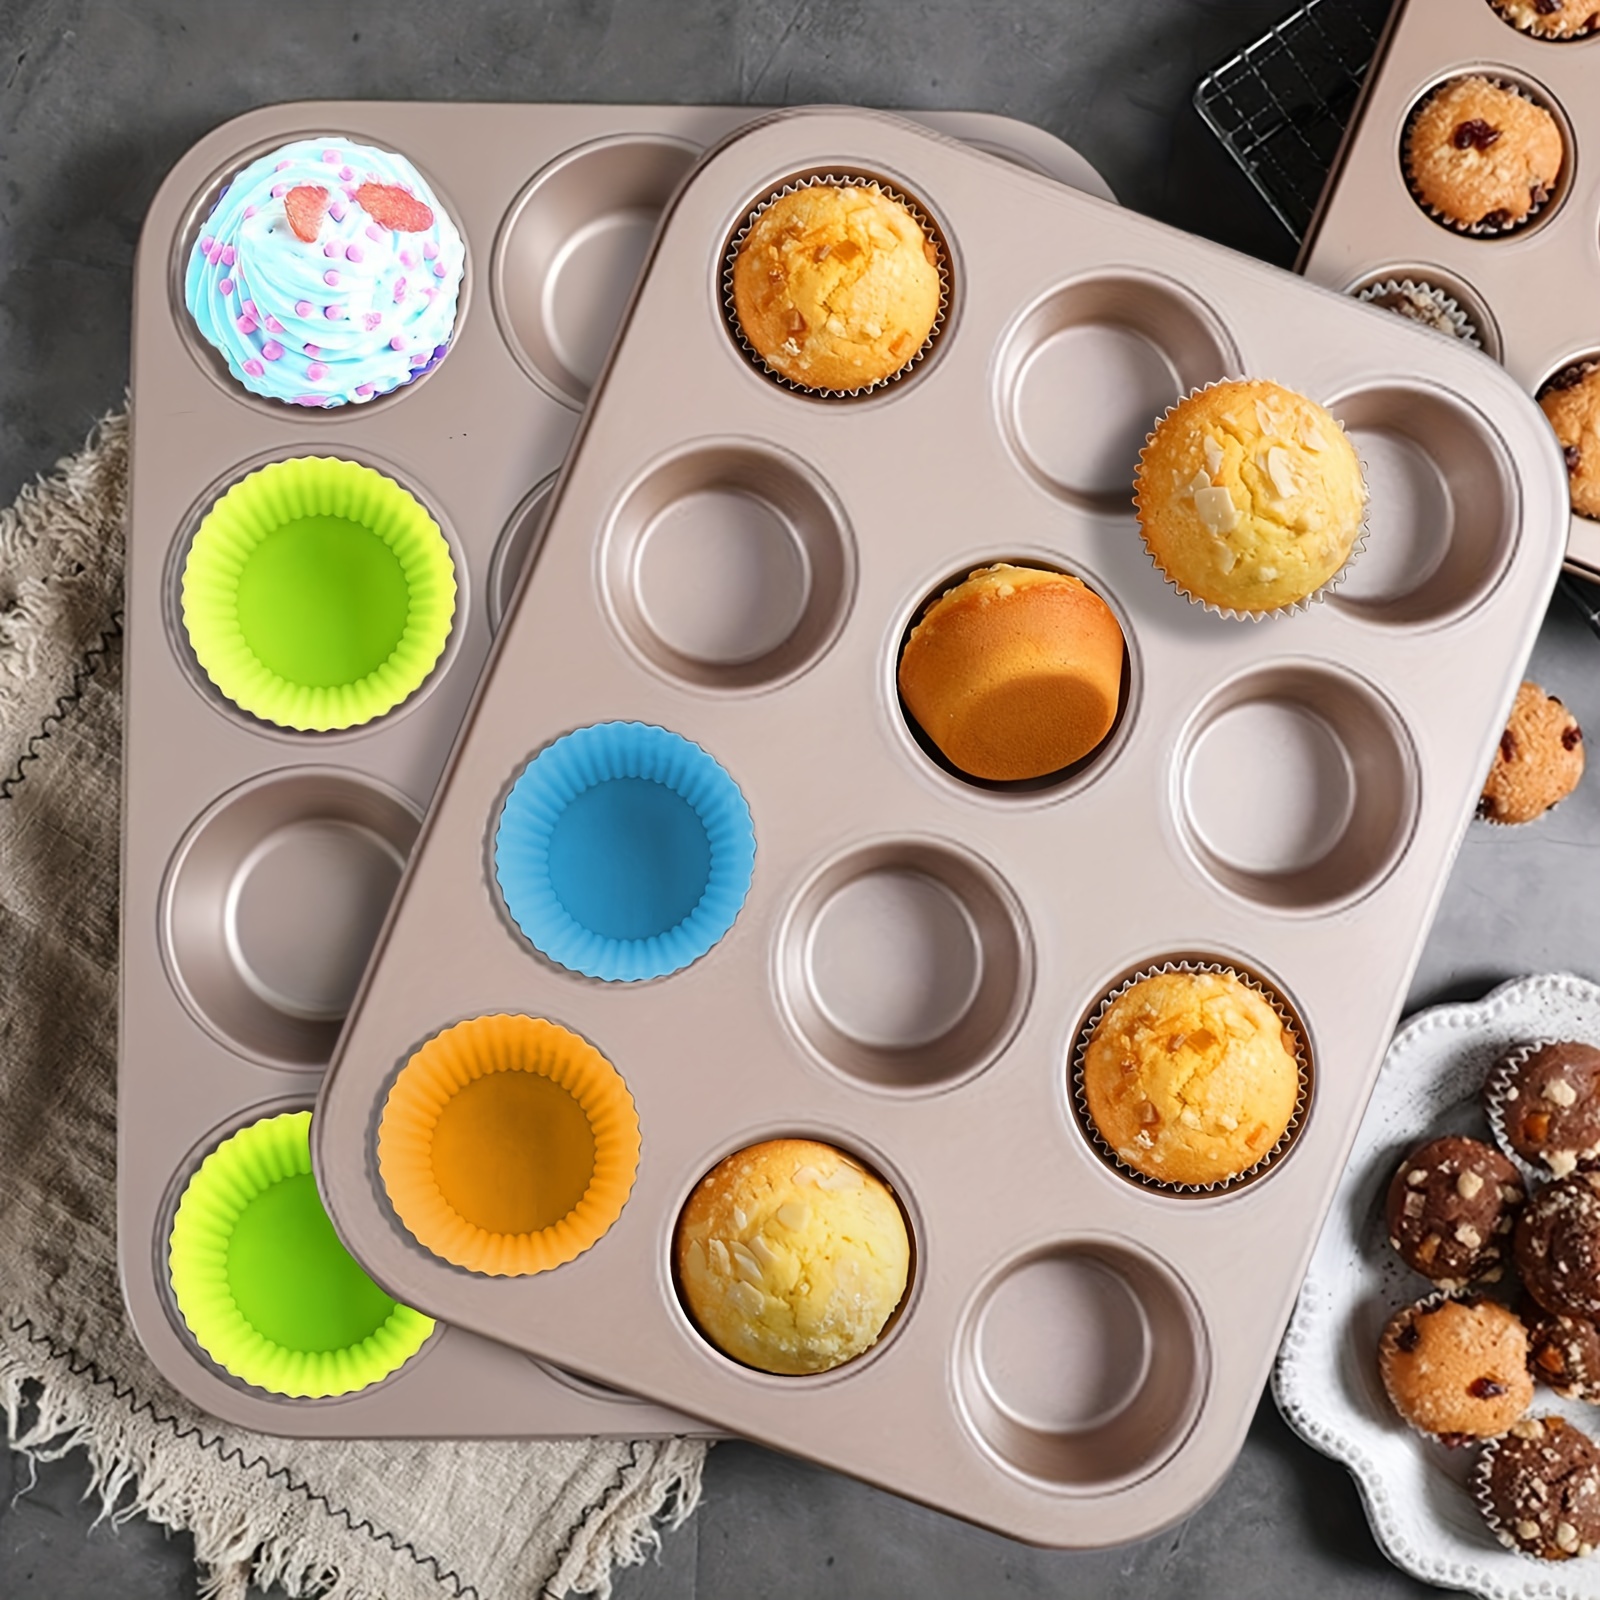 

1pc, 12-cup Non-stick Muffin Pan With Cupcake Liners, Mini Cake Baking Tray, Metal Bakeware For Oven Use, Home Kitchen Essentials